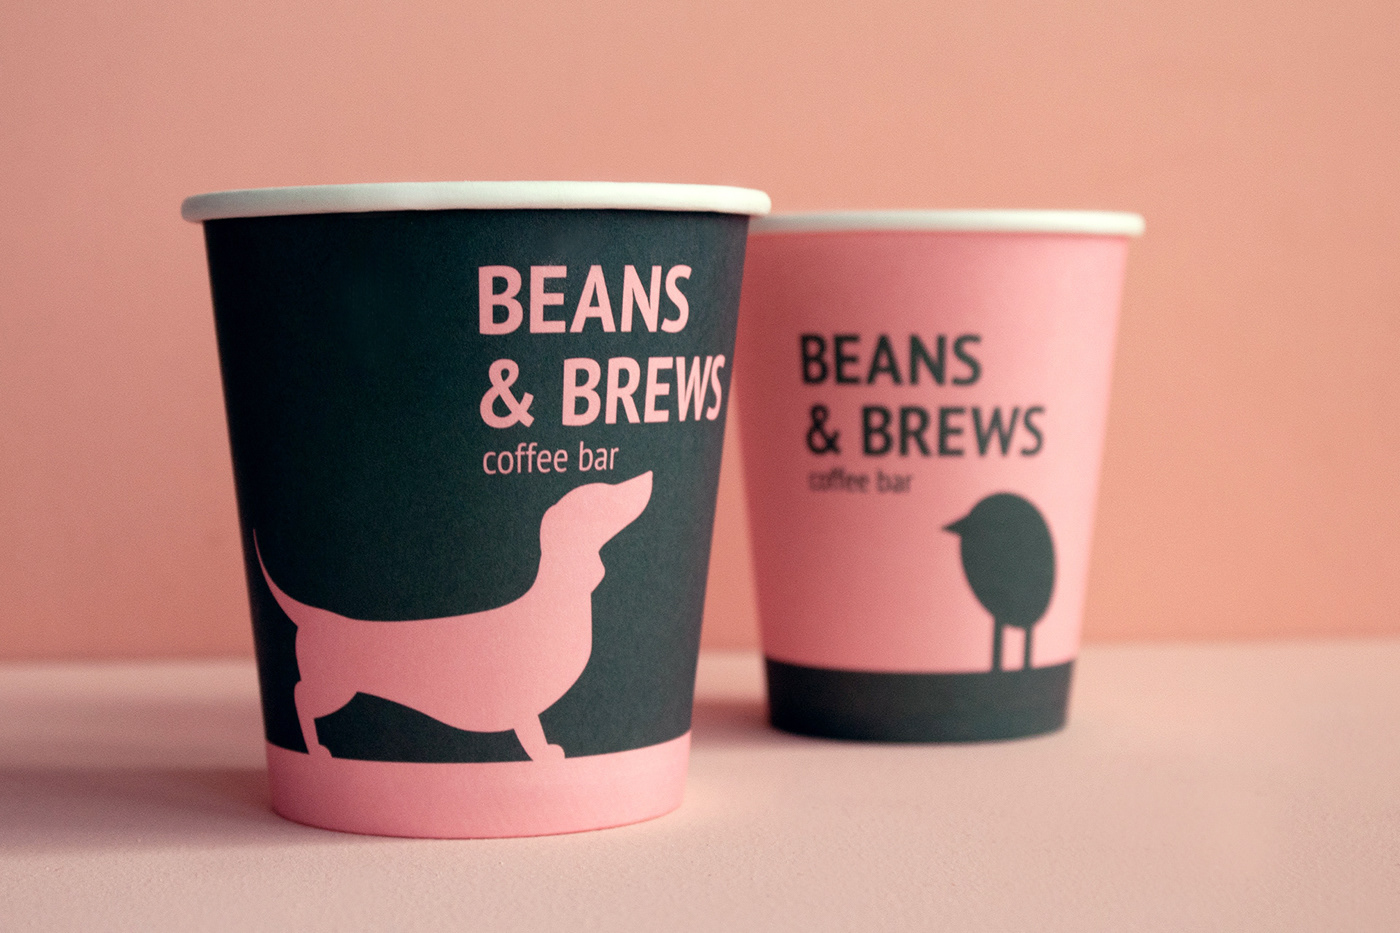 Branding for Coffee House Concept